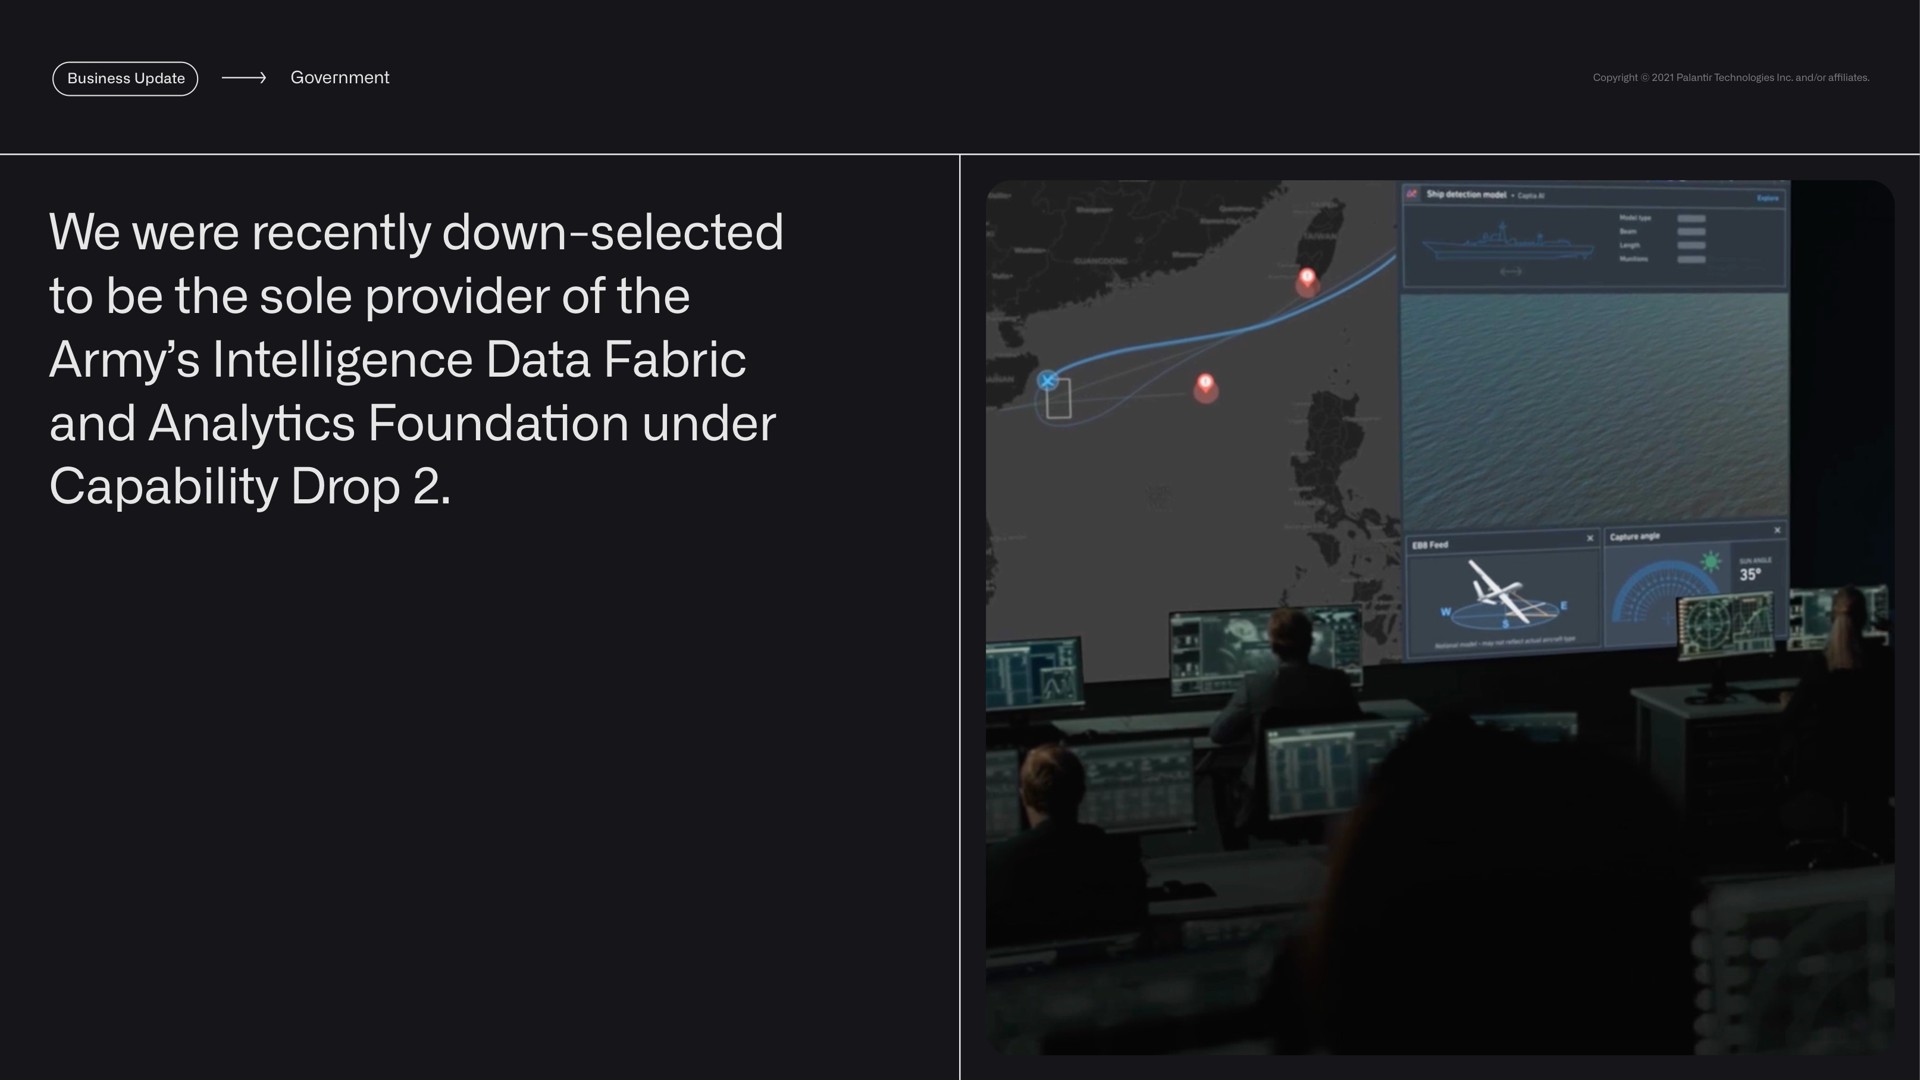 government we were recently down selected to be the sole provider of the army intelligence data fabric and analytics foundation under capability drop | Palantir